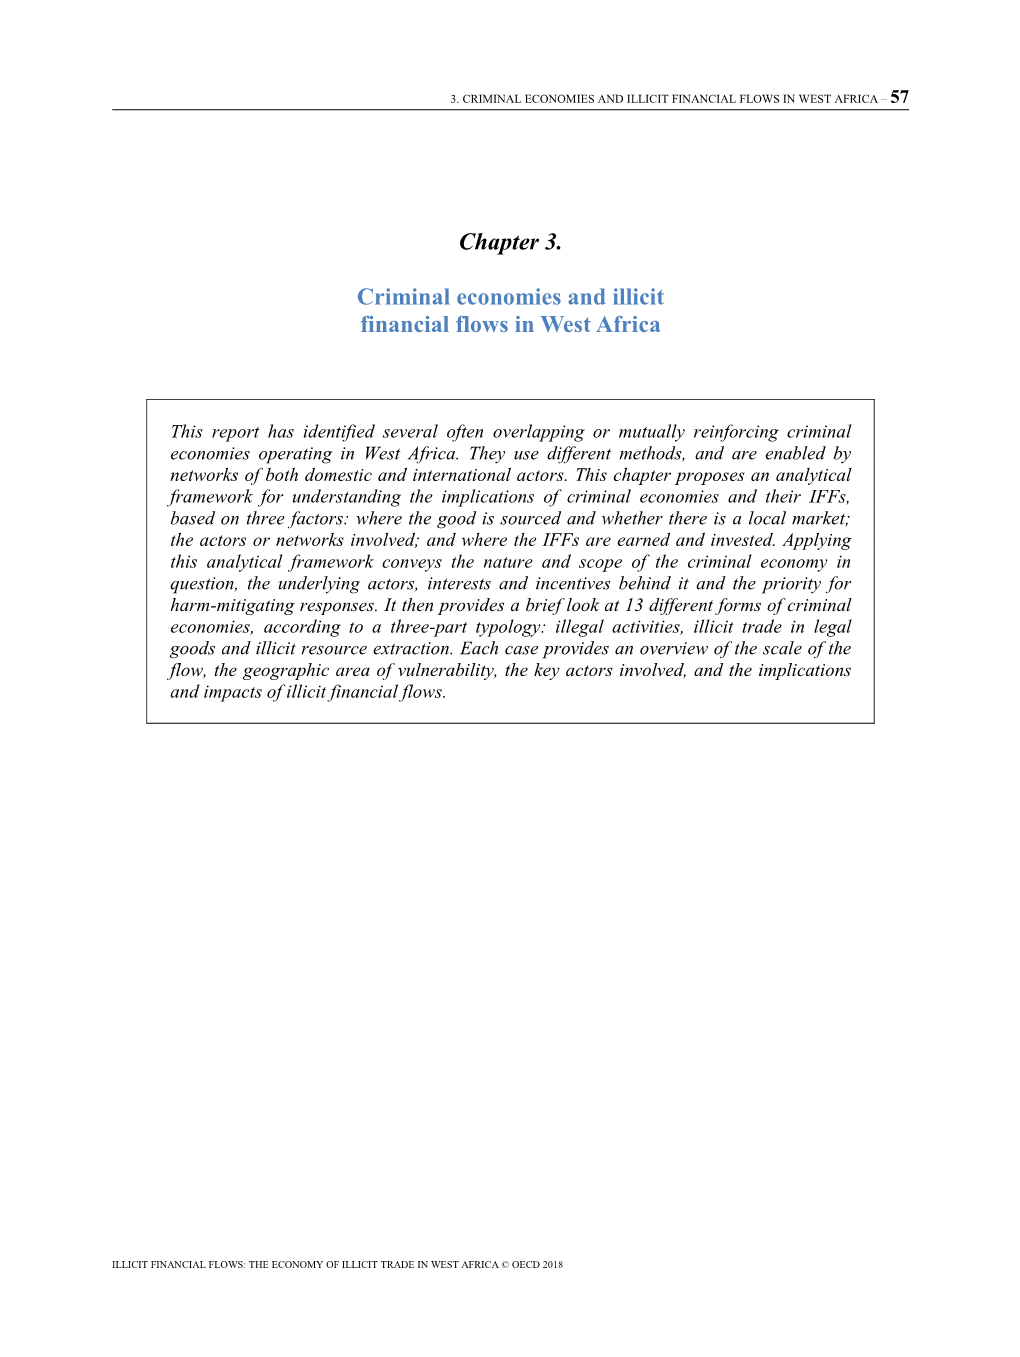 Chapter 3. Criminal Economies and Illicit Financial Flows in West Africa